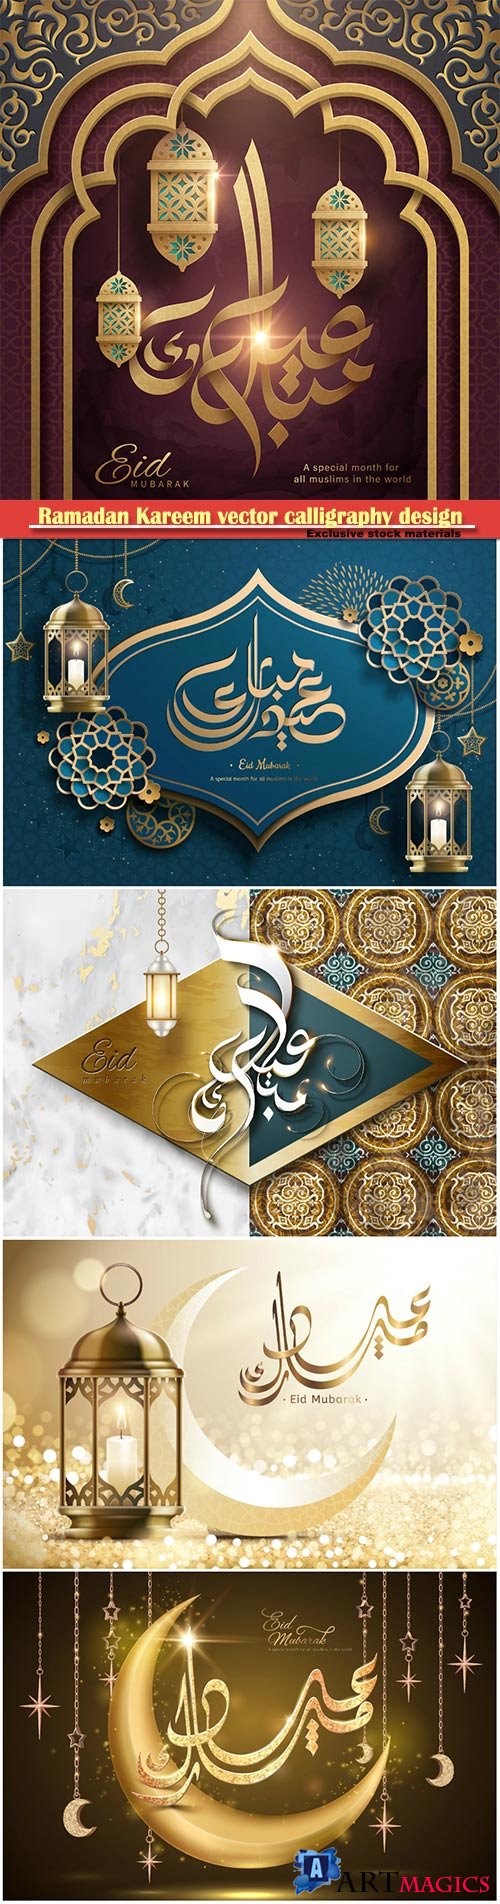 Ramadan Kareem vector calligraphy design with decorative floral pattern, mosque silhouette, crescent and glittering islamic background # 33